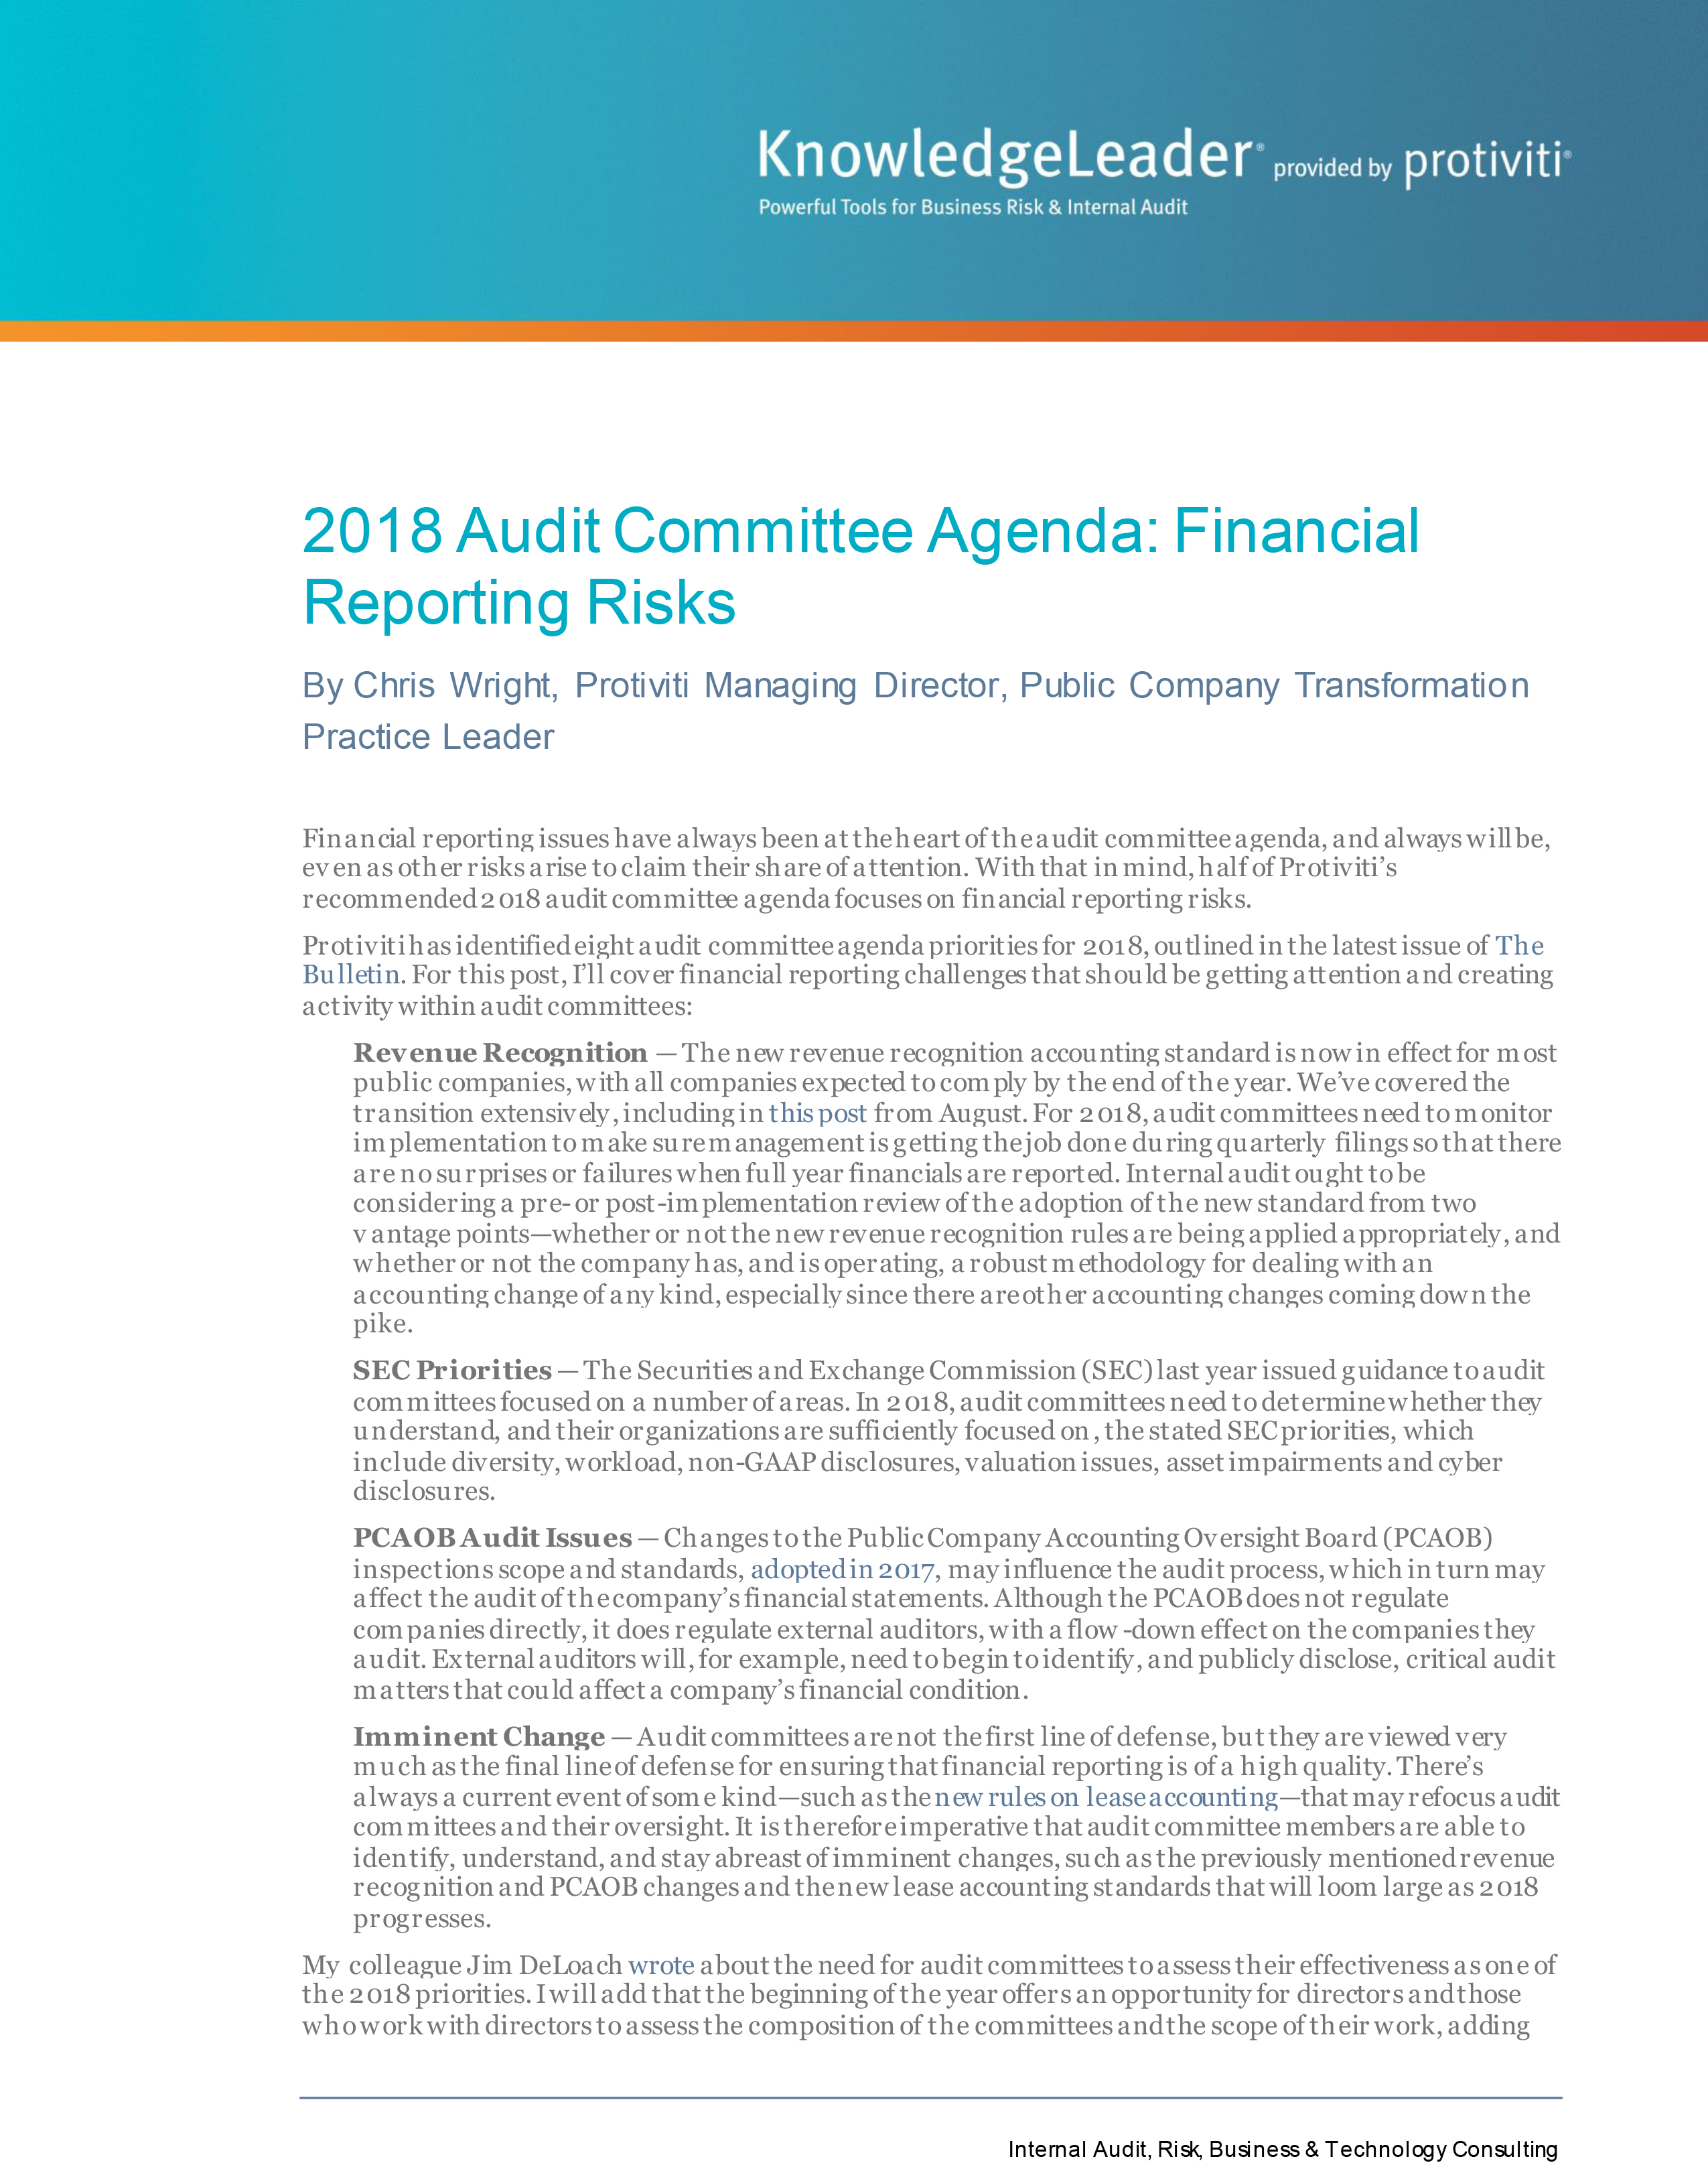 Screenshot of the first page of 2018 Audit Committee Agenda: Financial Reporting Risks